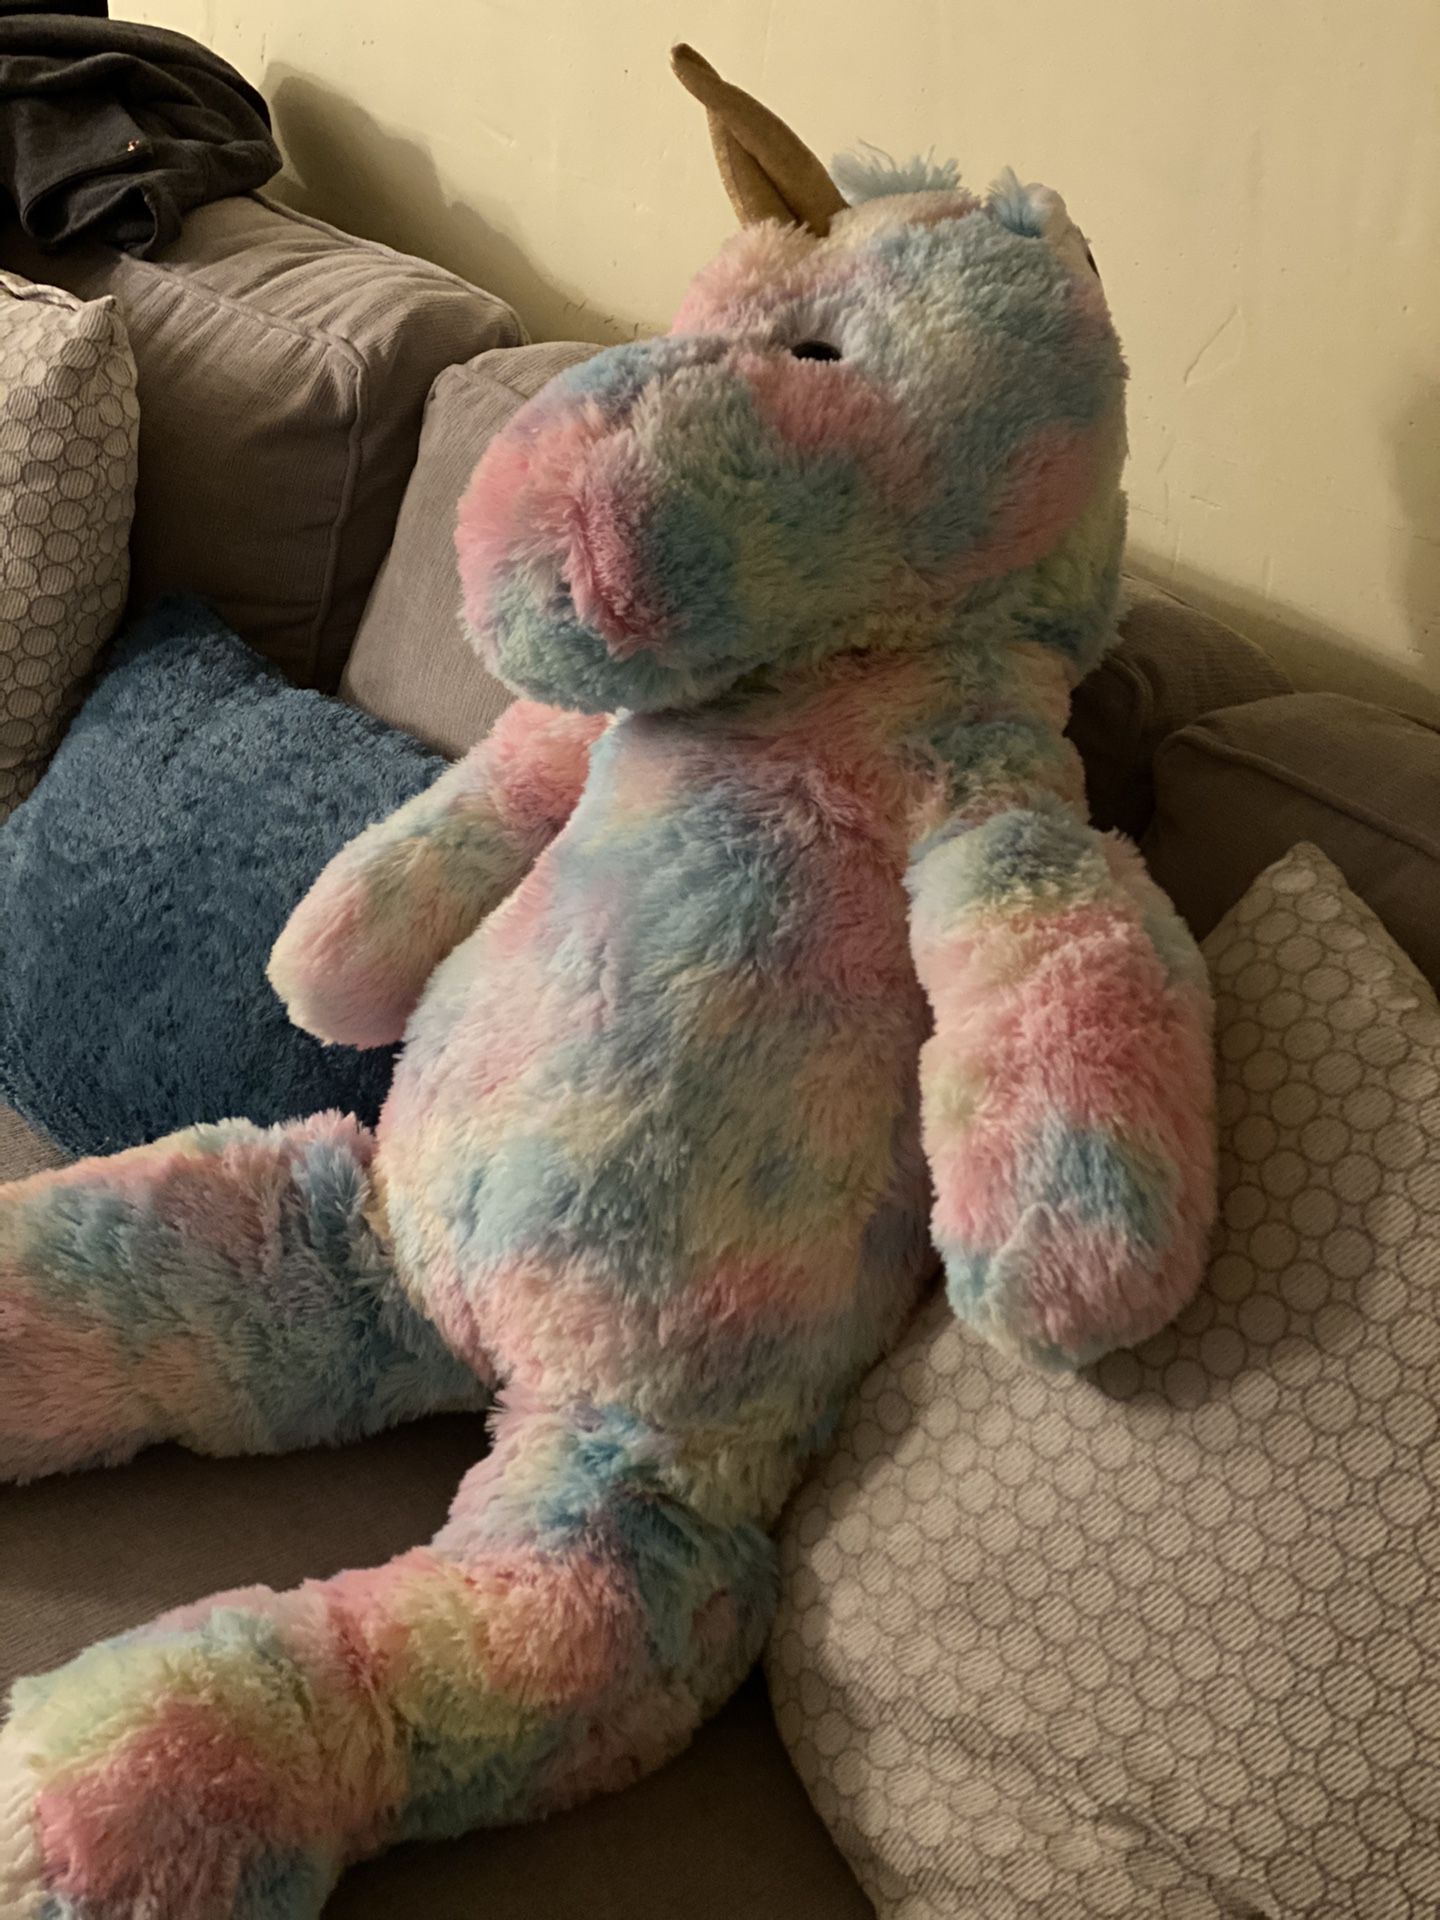 Brand New - just bought Super soft Large Rainbow Unicorn Teddy Bear Bought one to many and ready to sell